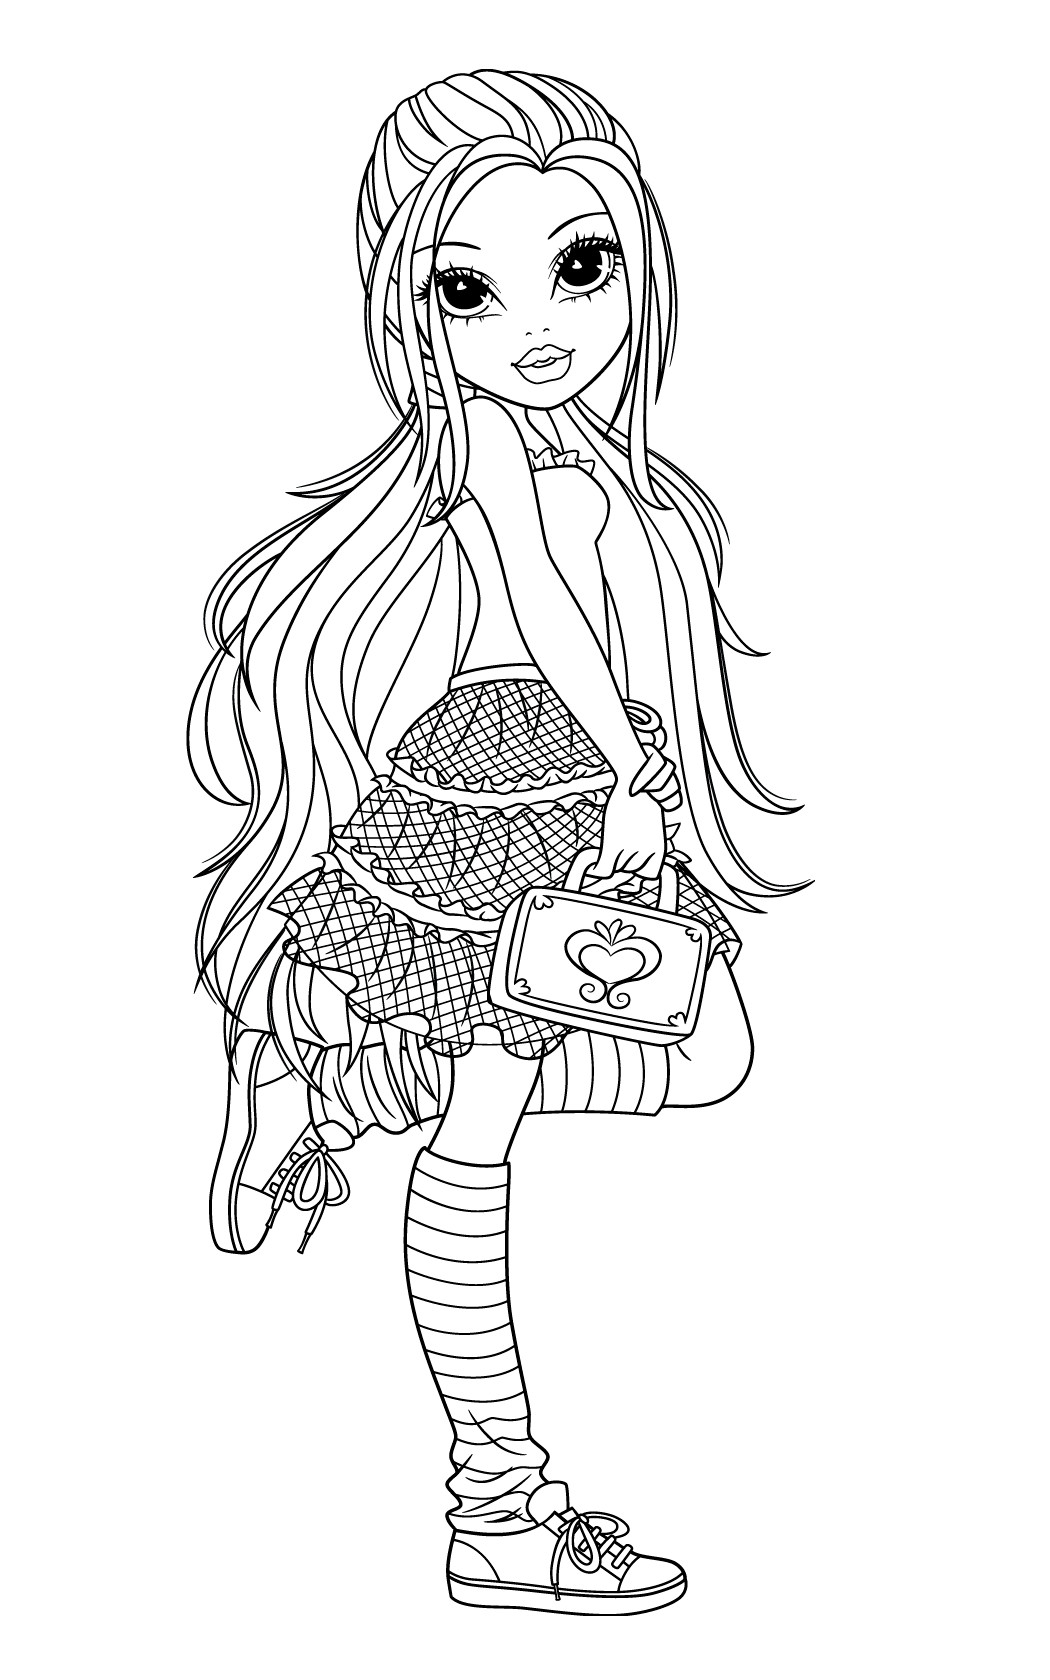 Coloring Sheet For Girls
 New Moxie Girlz Coloring Pages will be added frequently so